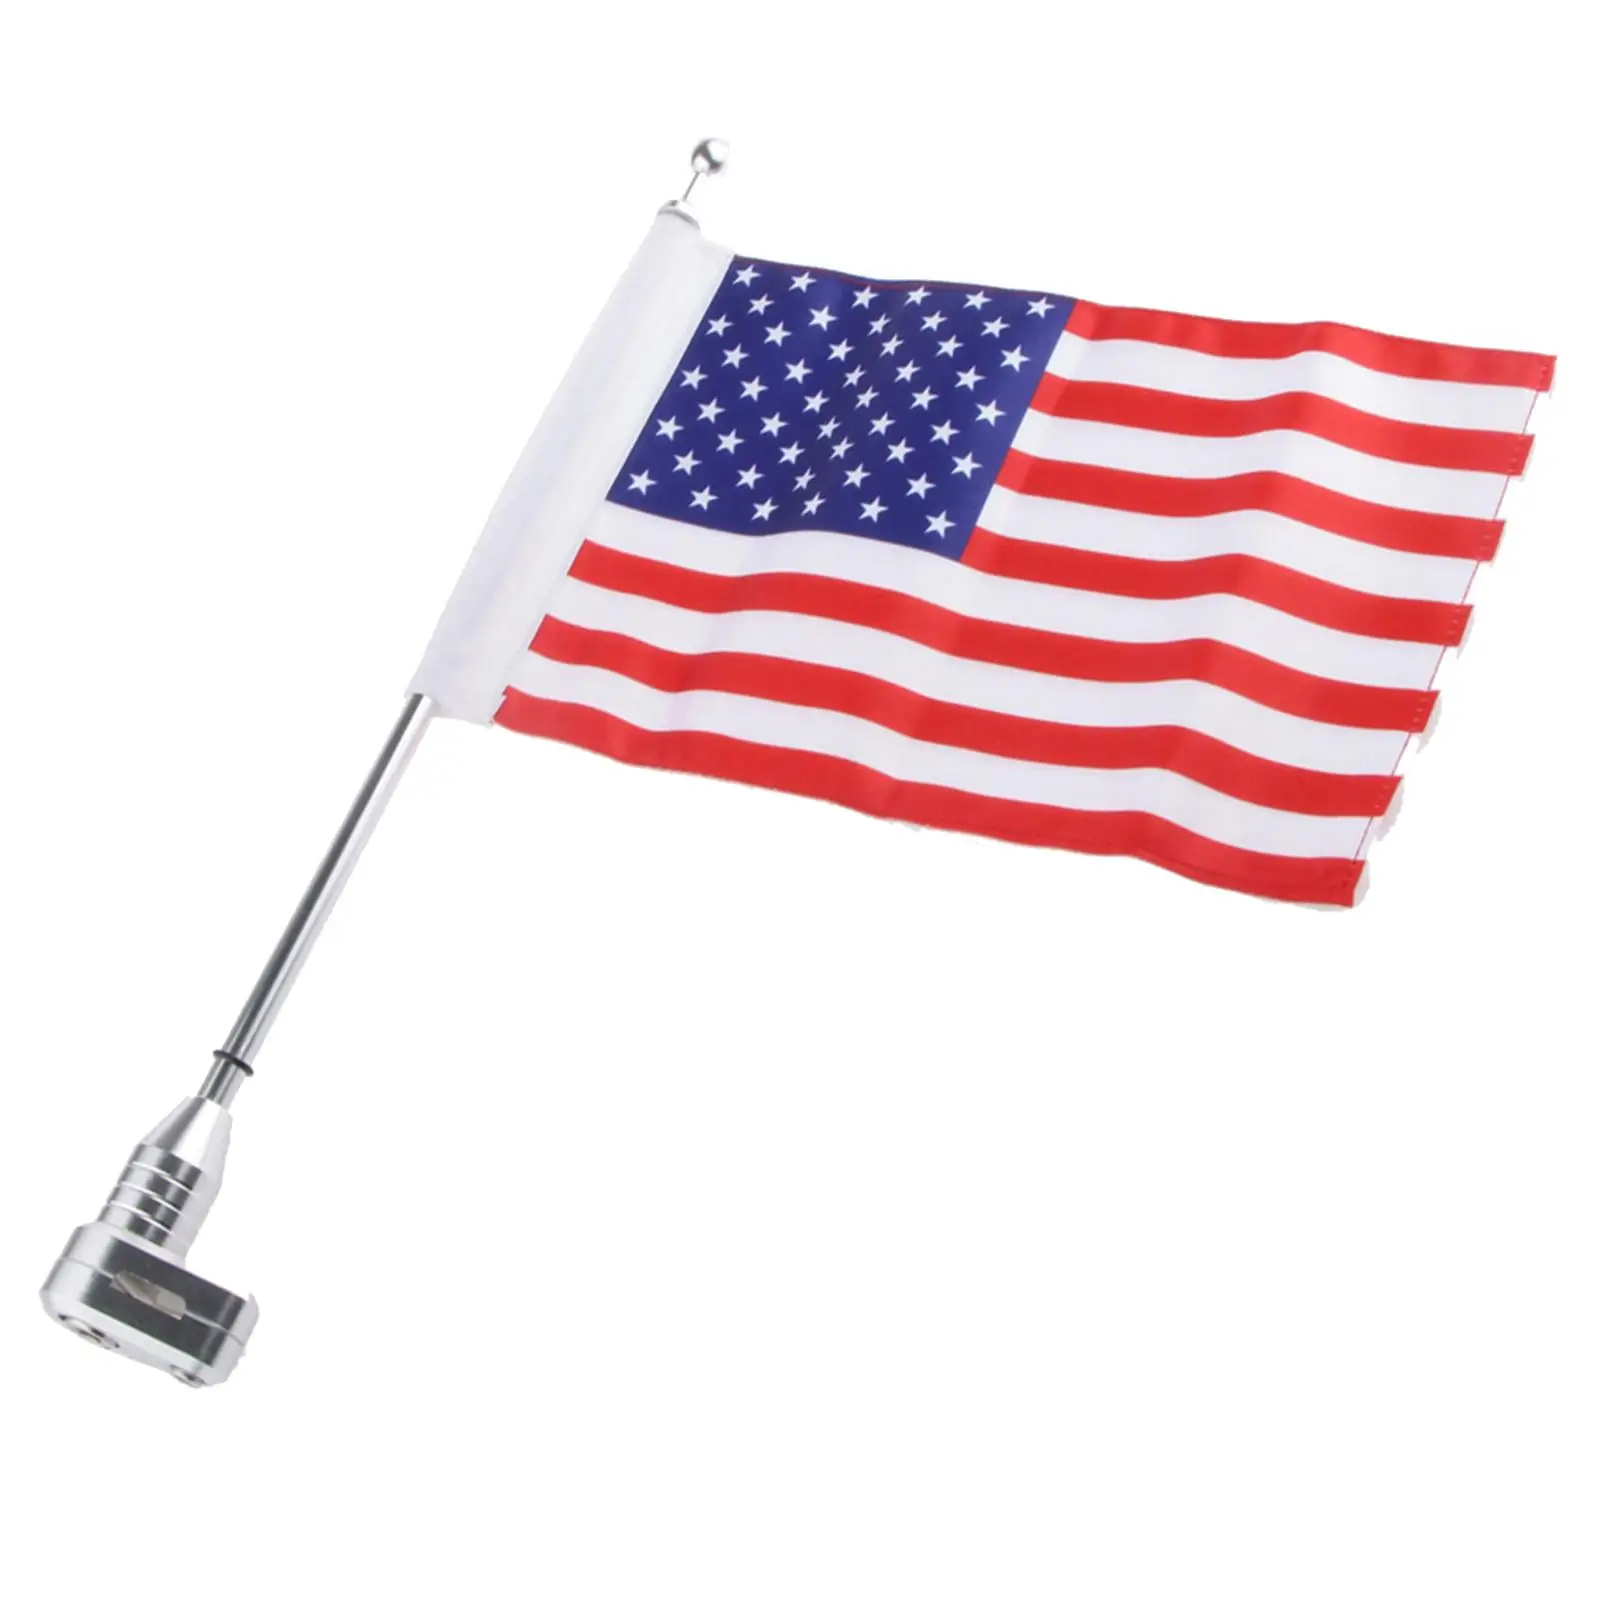 Motorcycle Rear Side Flagpole Mount Holder And  Flag USA  6 Inch 16 X 27 Cm Fit for XL883 Luggage Rack